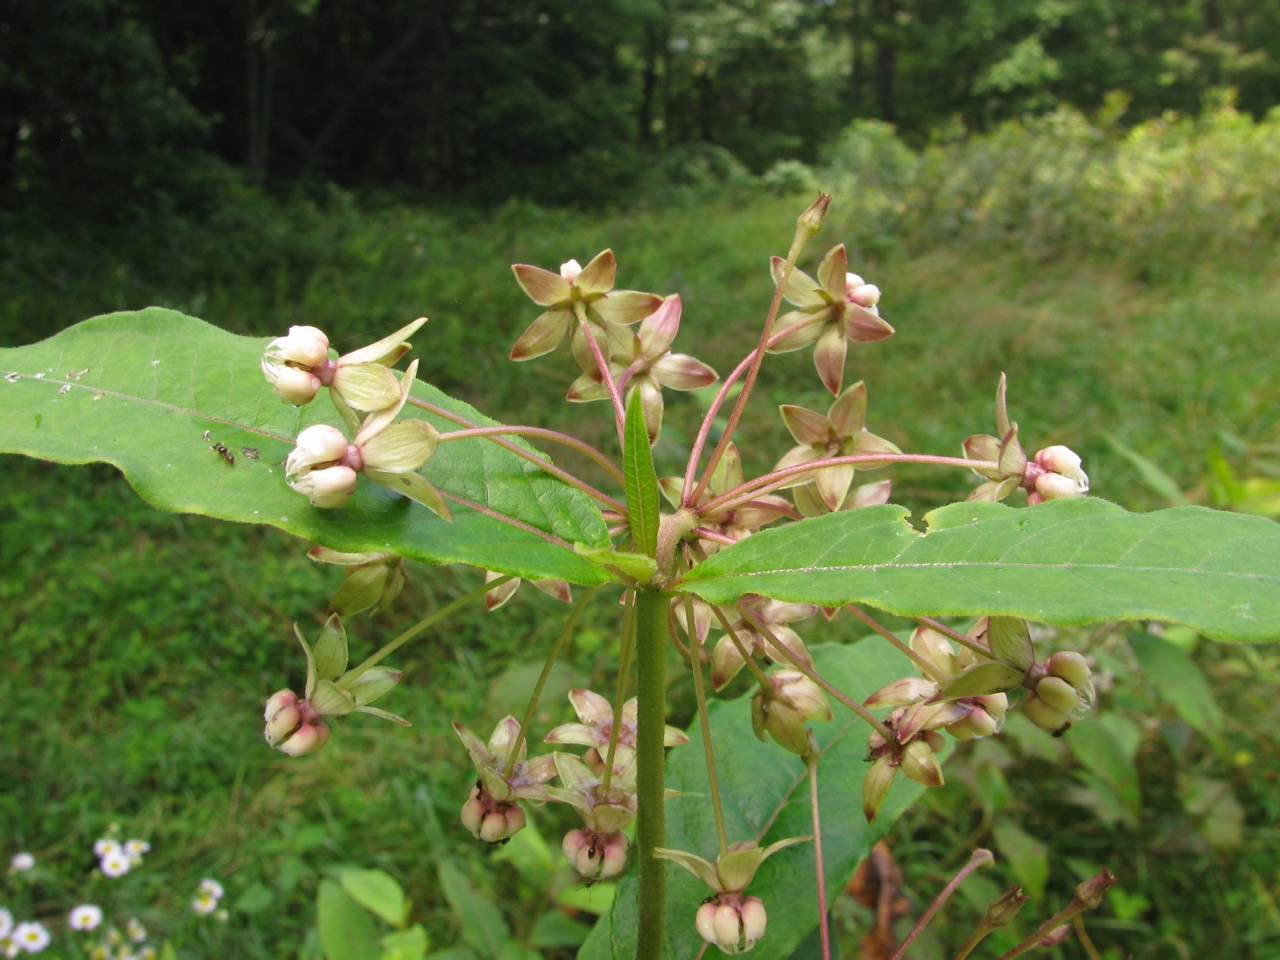 The Scientific Name is Asclepias exaltata. You will likely hear them called Poke Milkweed, Tall Milkweed. This picture shows the The flowers are greenish-white but can also be tinged with pink. of Asclepias exaltata